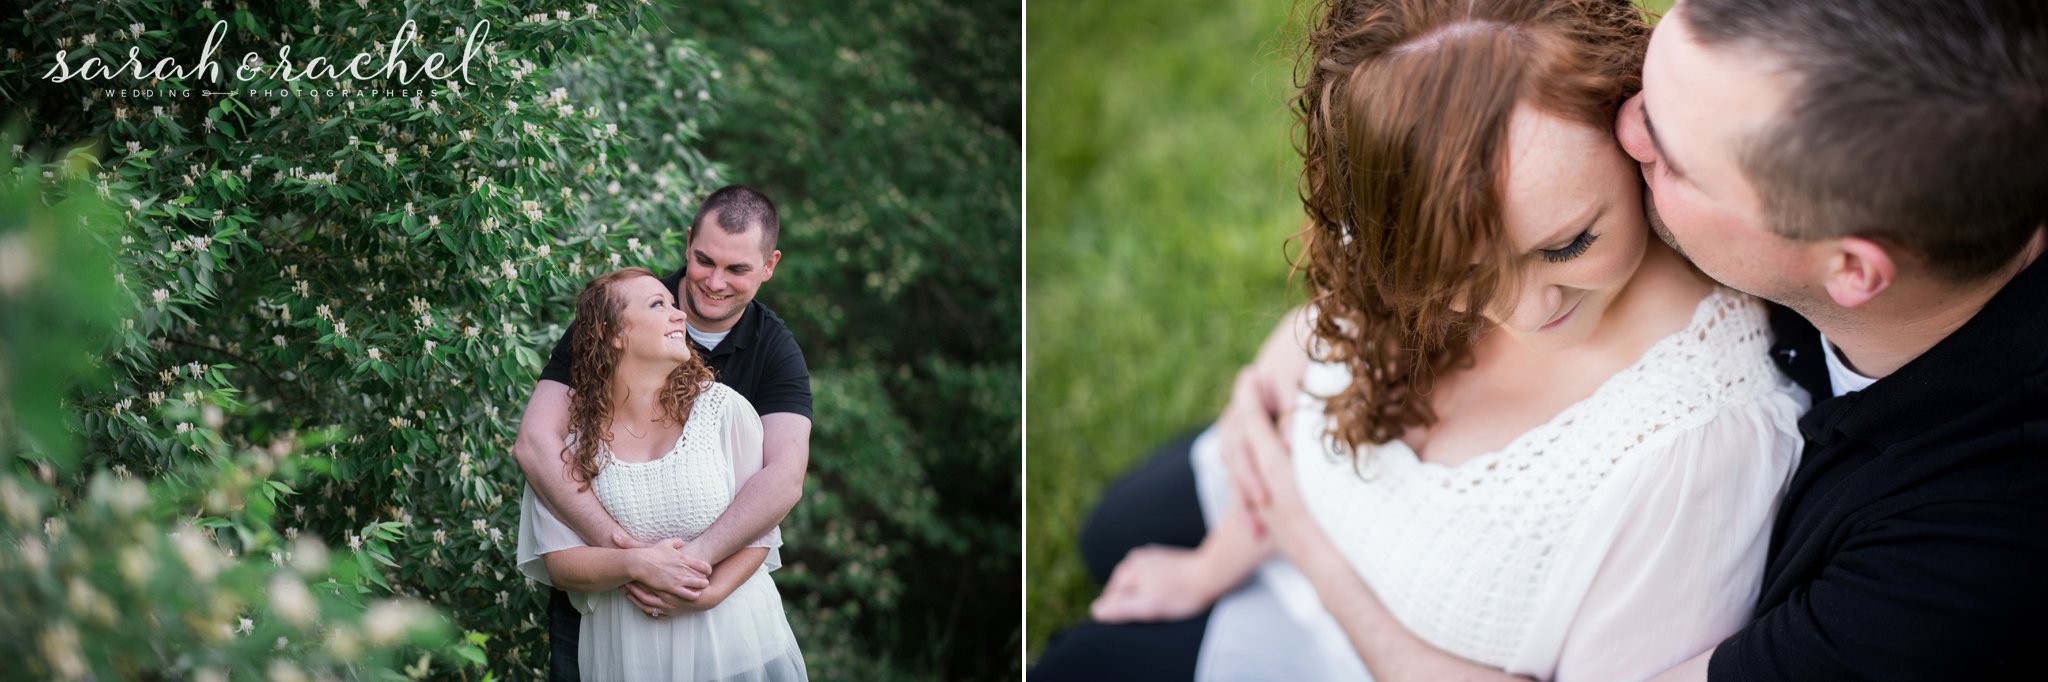 Patrick + Melissa | Fort Harrison State Park Engagement Session | Indianapolis, IN 